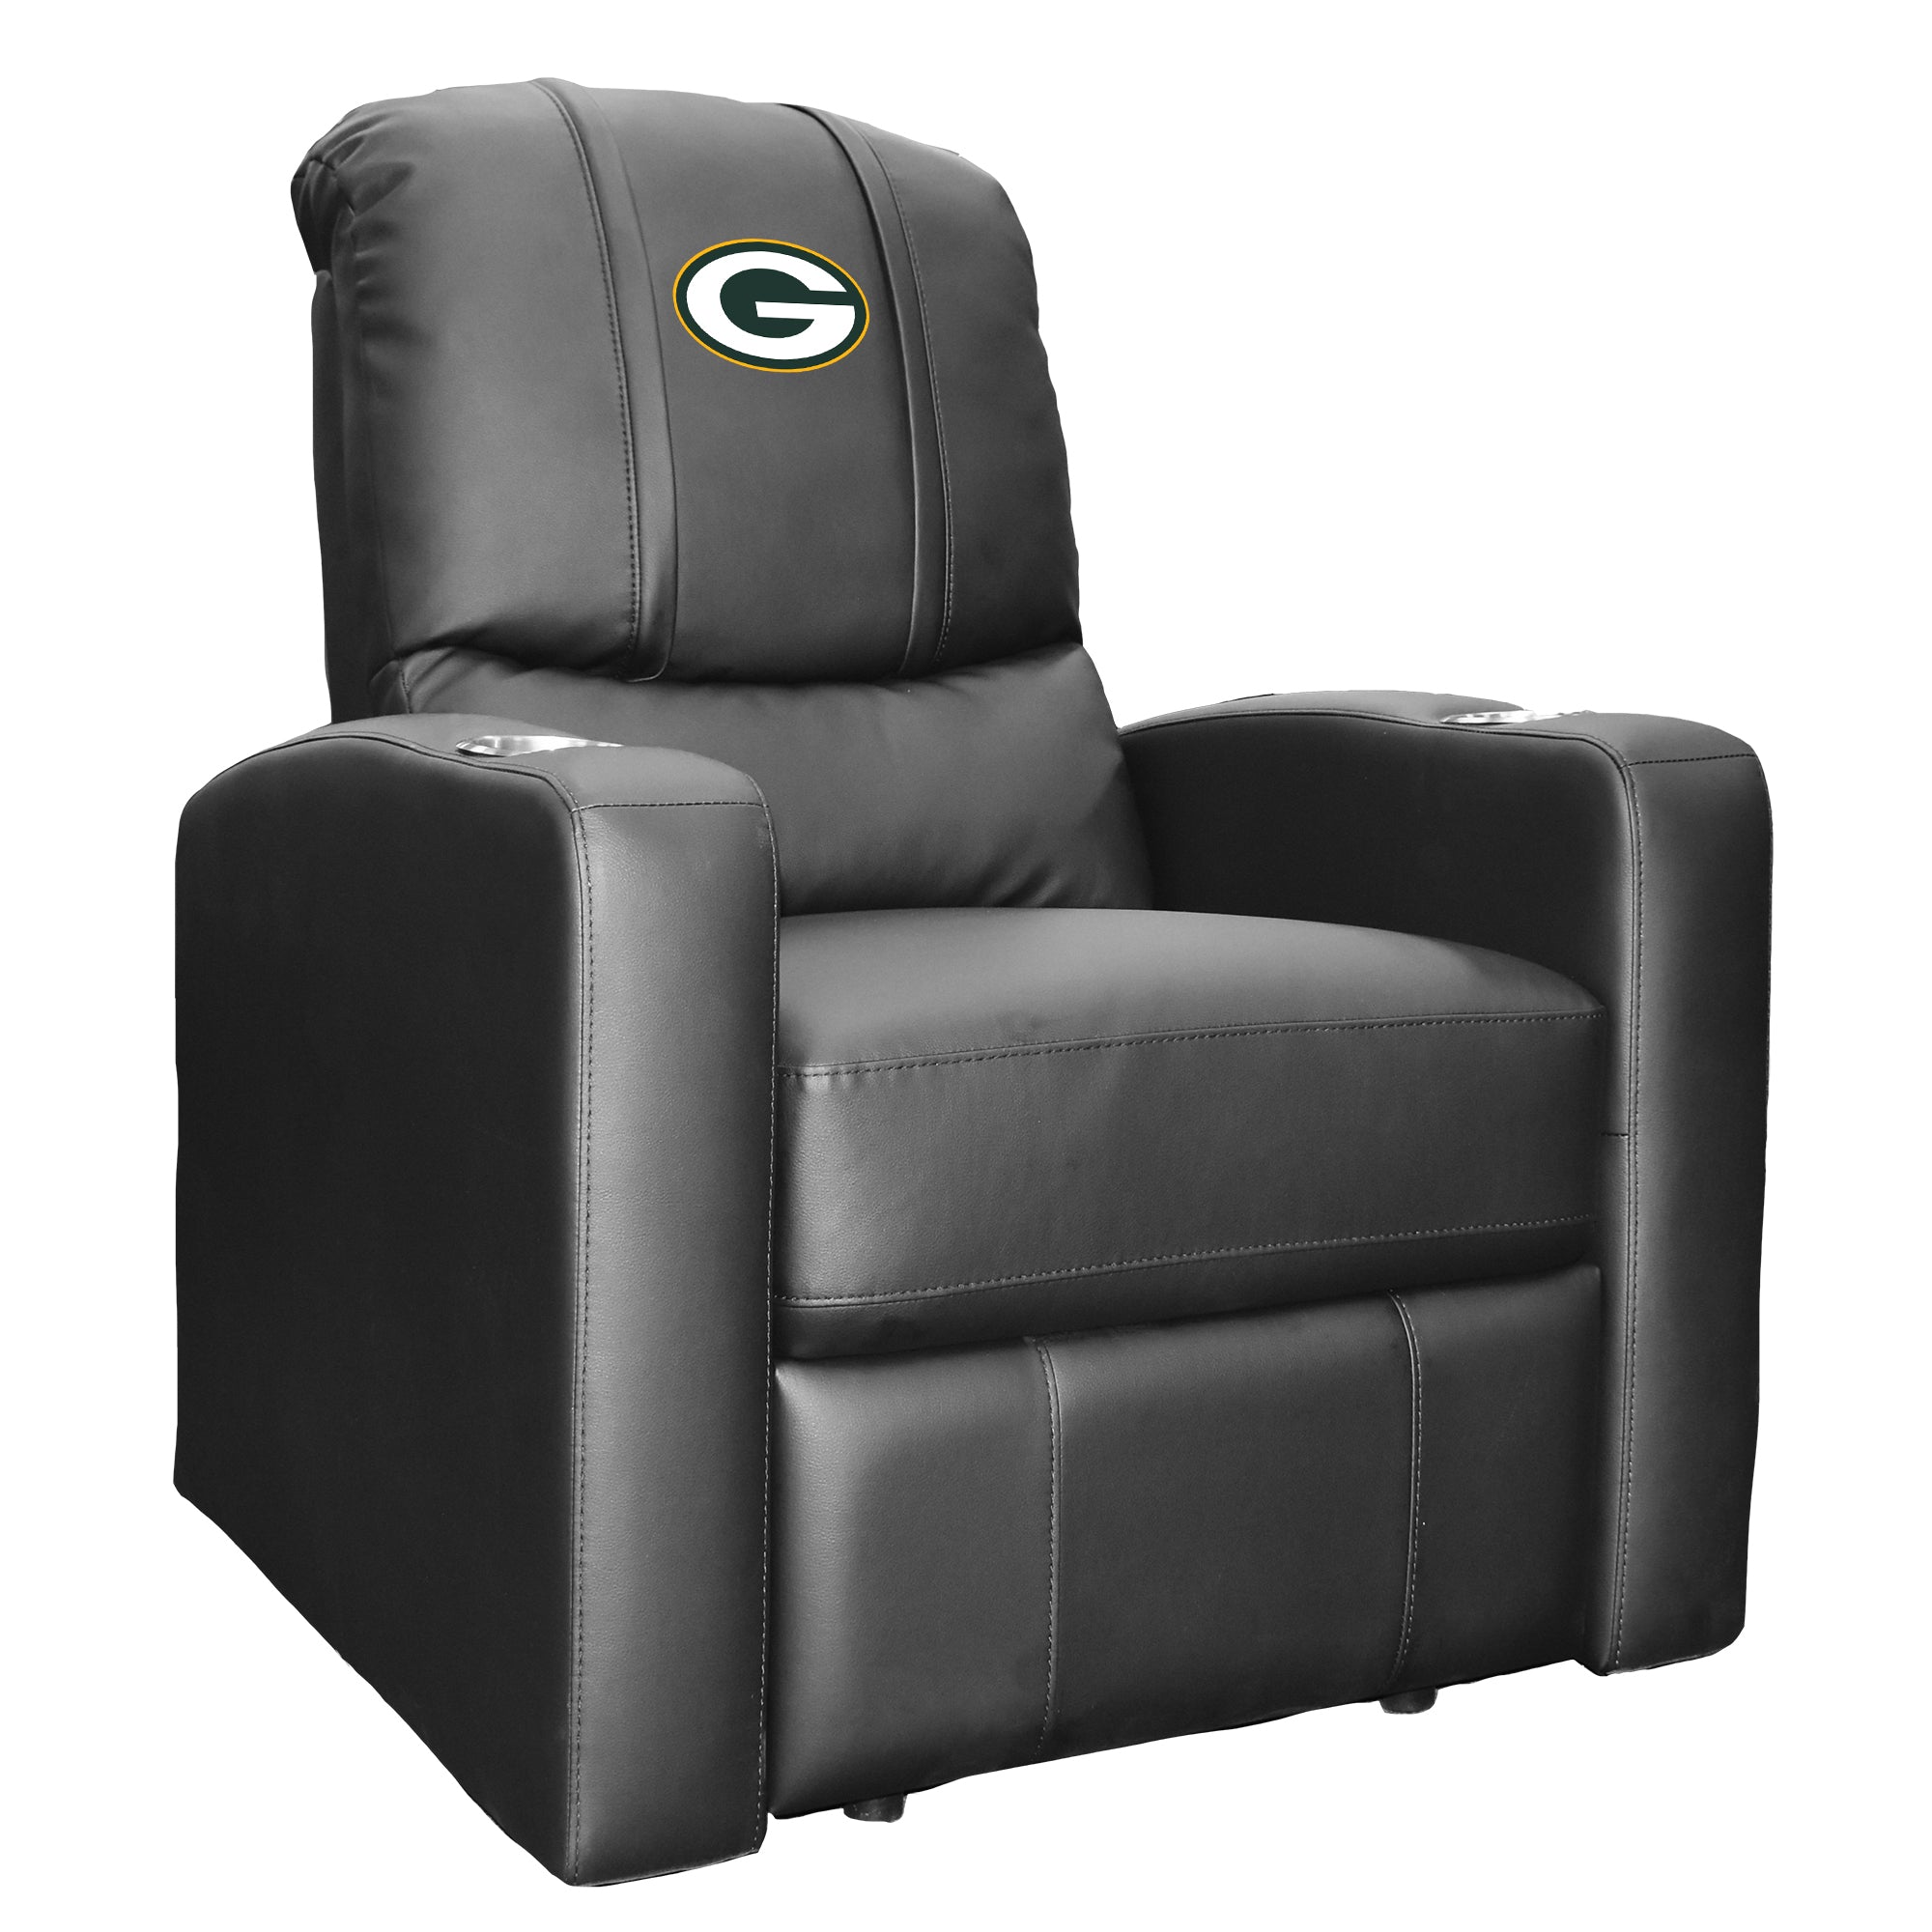 Green Bay Packers Stealth Recliner Manual